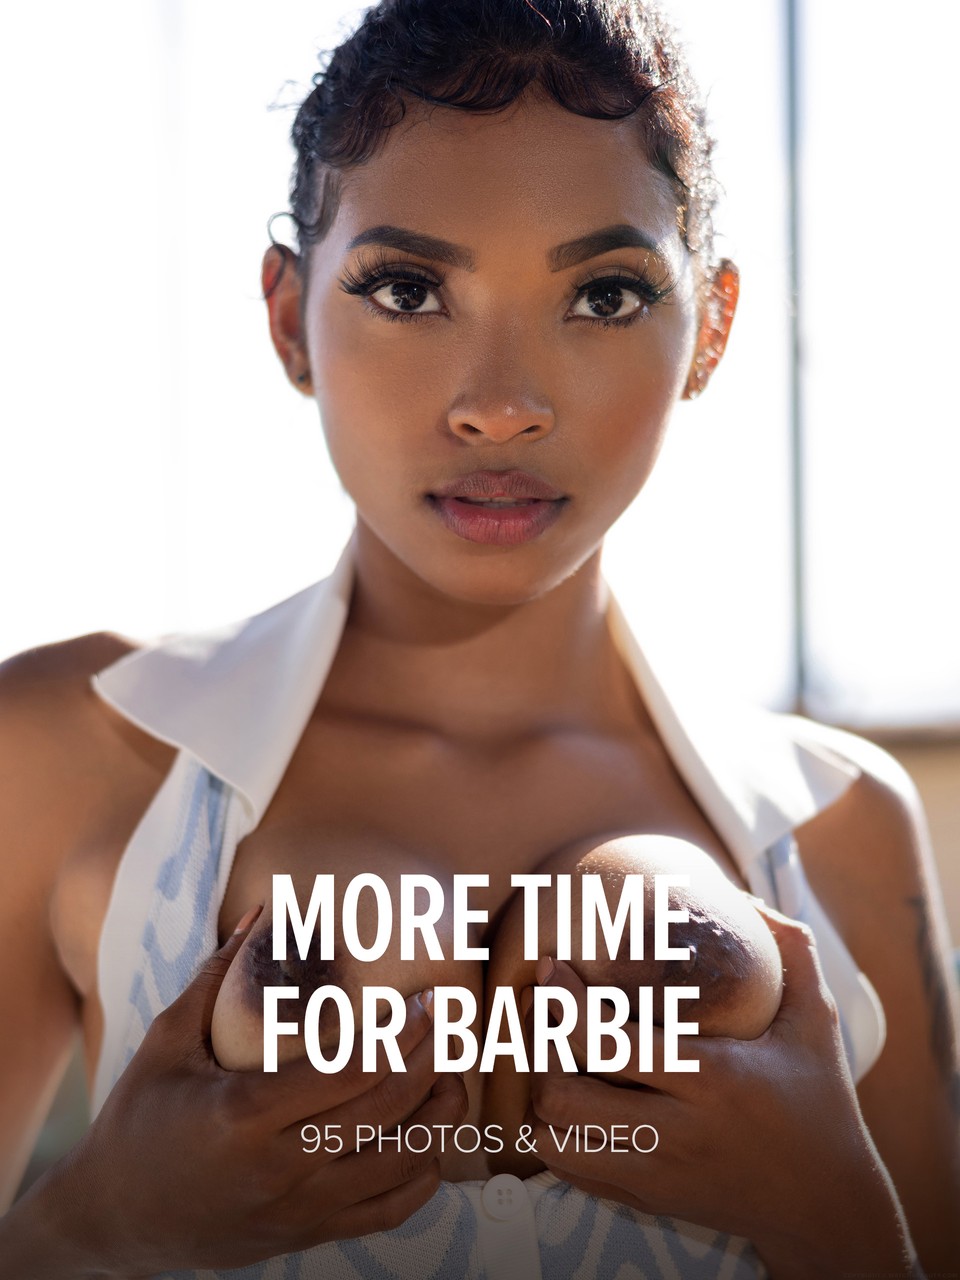 Watch 4 Beauty Barbie More Time For Barbie